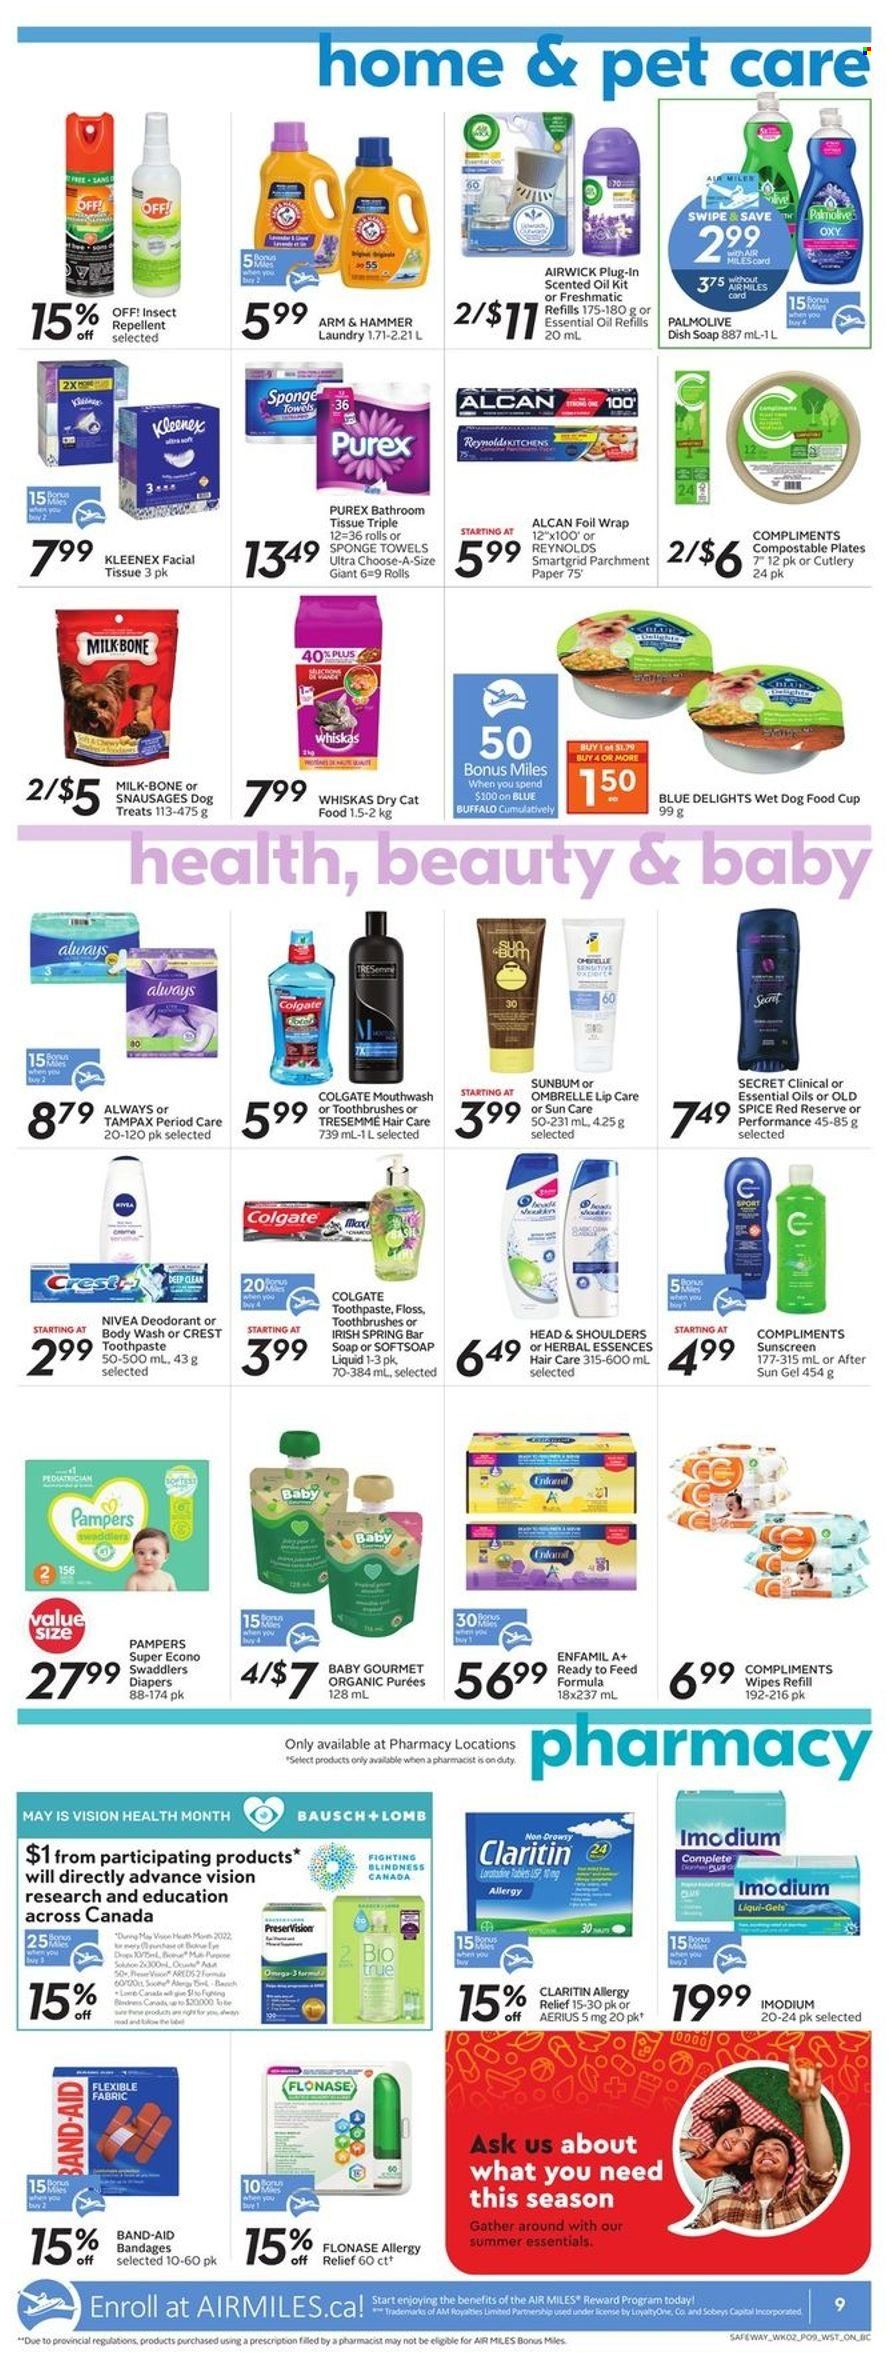 thumbnail - Safeway Flyer - May 12, 2022 - May 18, 2022 - Sales products - milk, ARM & HAMMER, spice, Enfamil, wipes, nappies, Nivea, bath tissue, Kleenex, Purex, body wash, Softsoap, Palmolive, soap bar, soap, toothpaste, mouthwash, Crest, TRESemmé, Herbal Essences, anti-perspirant, repellent, animal food, Blue Buffalo, cat food, dog food, wet dog food, dry cat food, Biotrue, allergy relief, band-aid, Colgate, Tampax, Head & Shoulders, Imodium, Pampers, Old Spice, Whiskas, deodorant. Page 10.